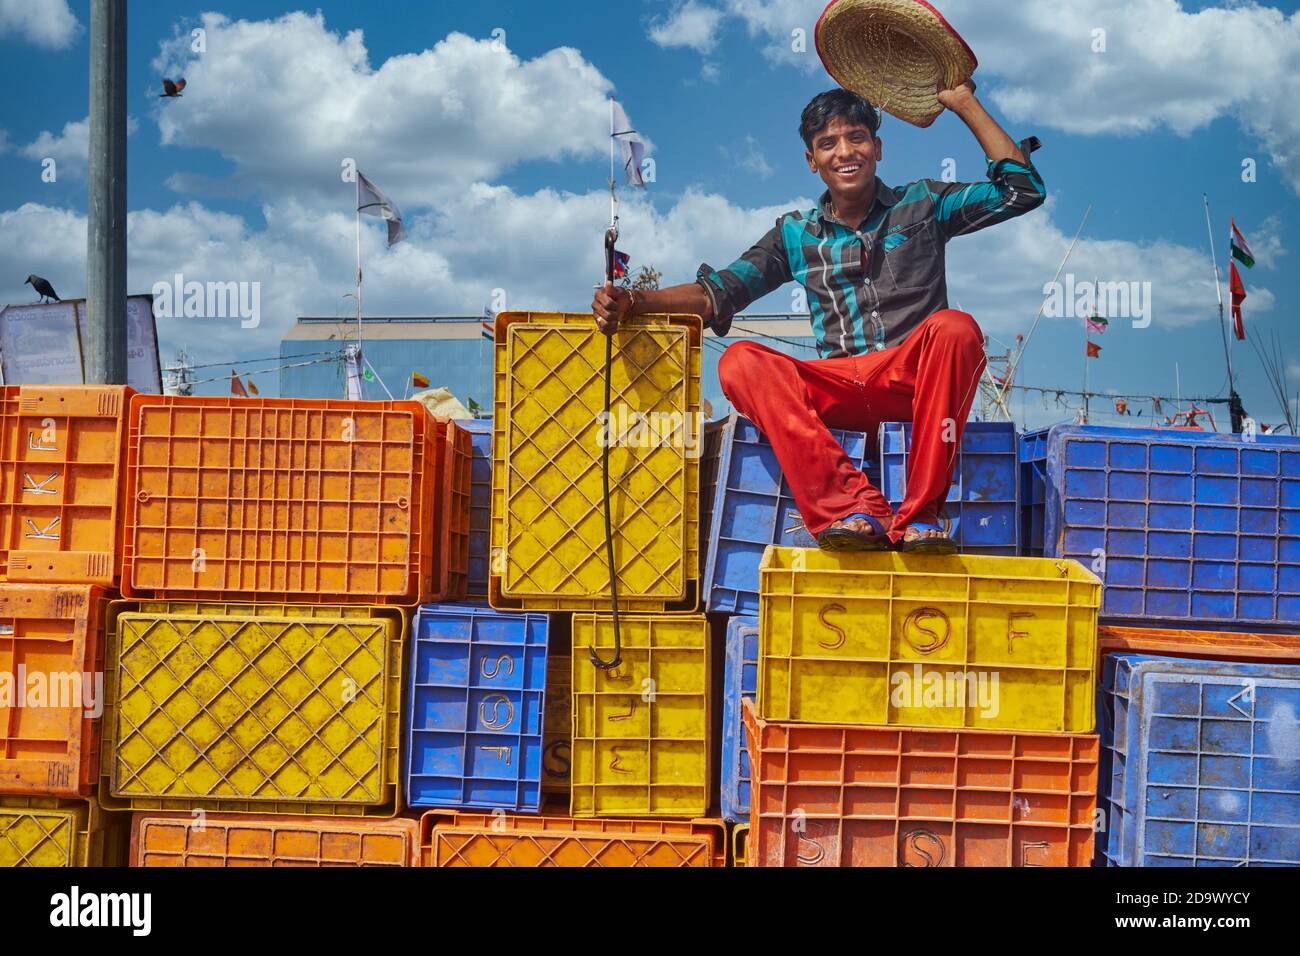 A young Indian man sitting on colorful plastic crates in the Old Port of Mangalore, Karnataka, India, lifts his hat in a cheerful greeting Stock Photo